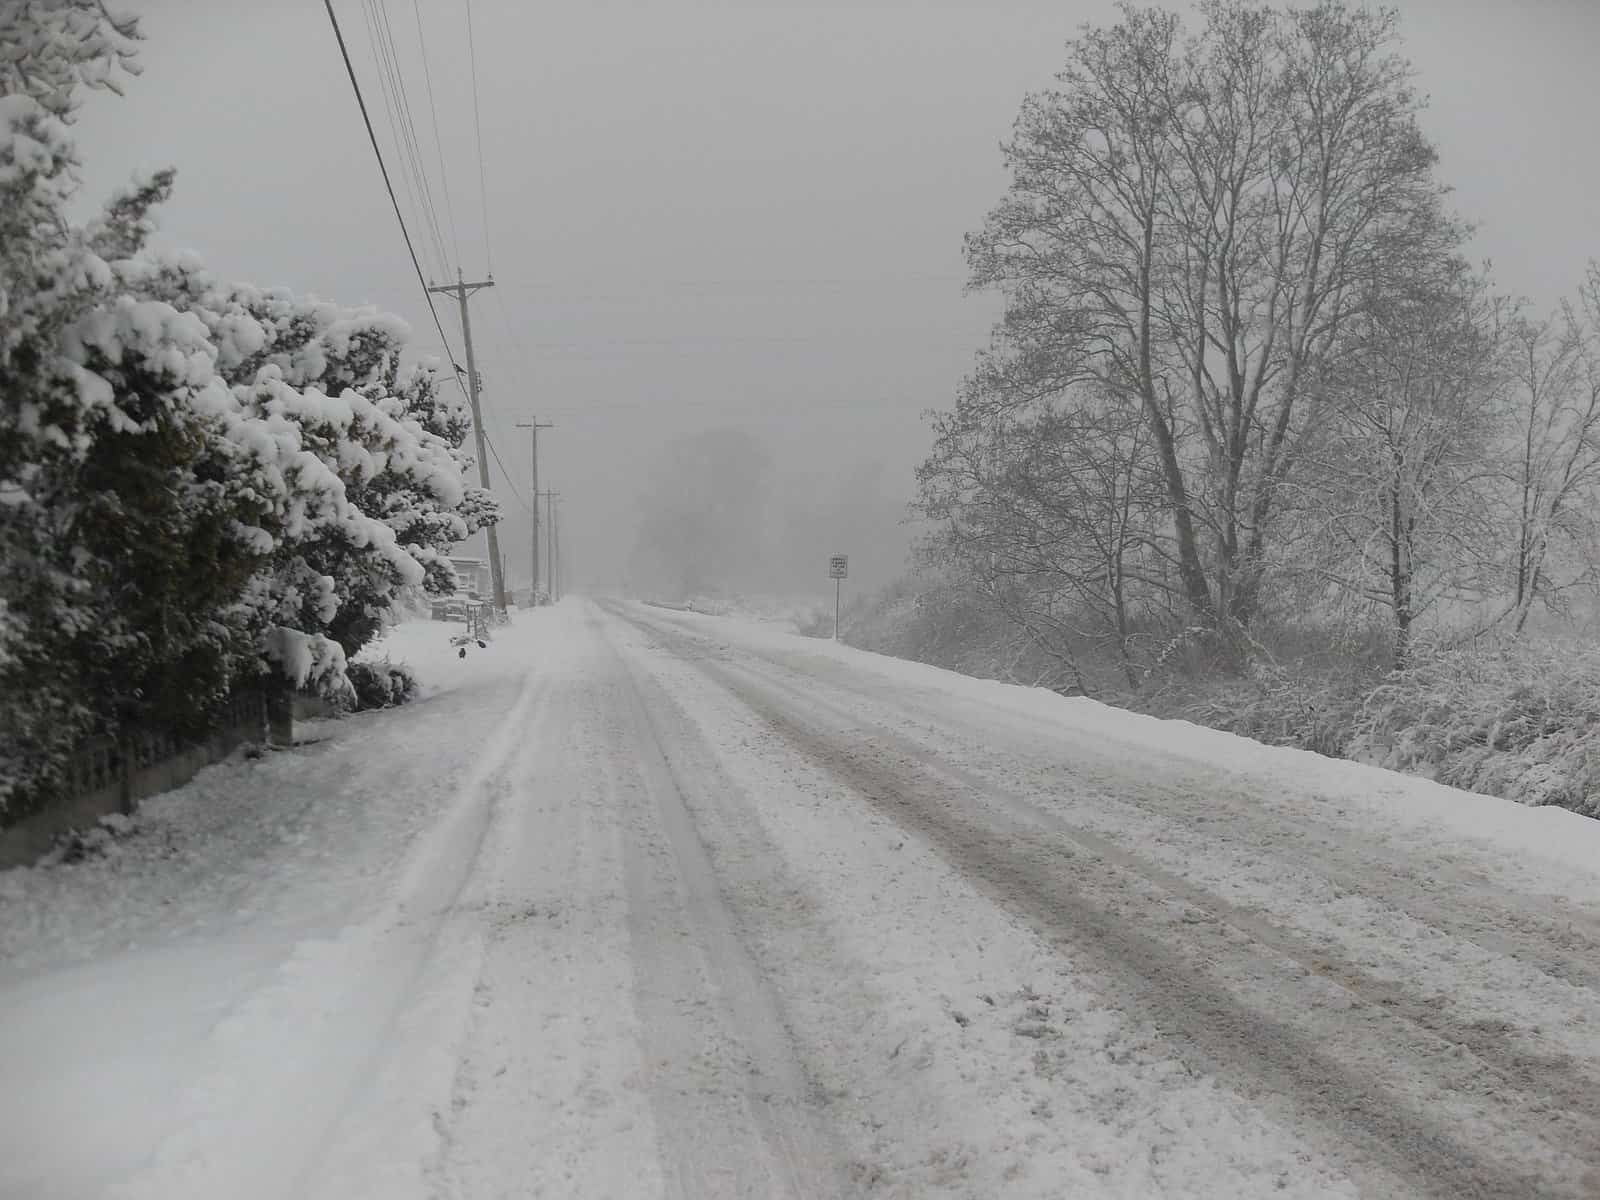 A snowy road is shown lined with trees.